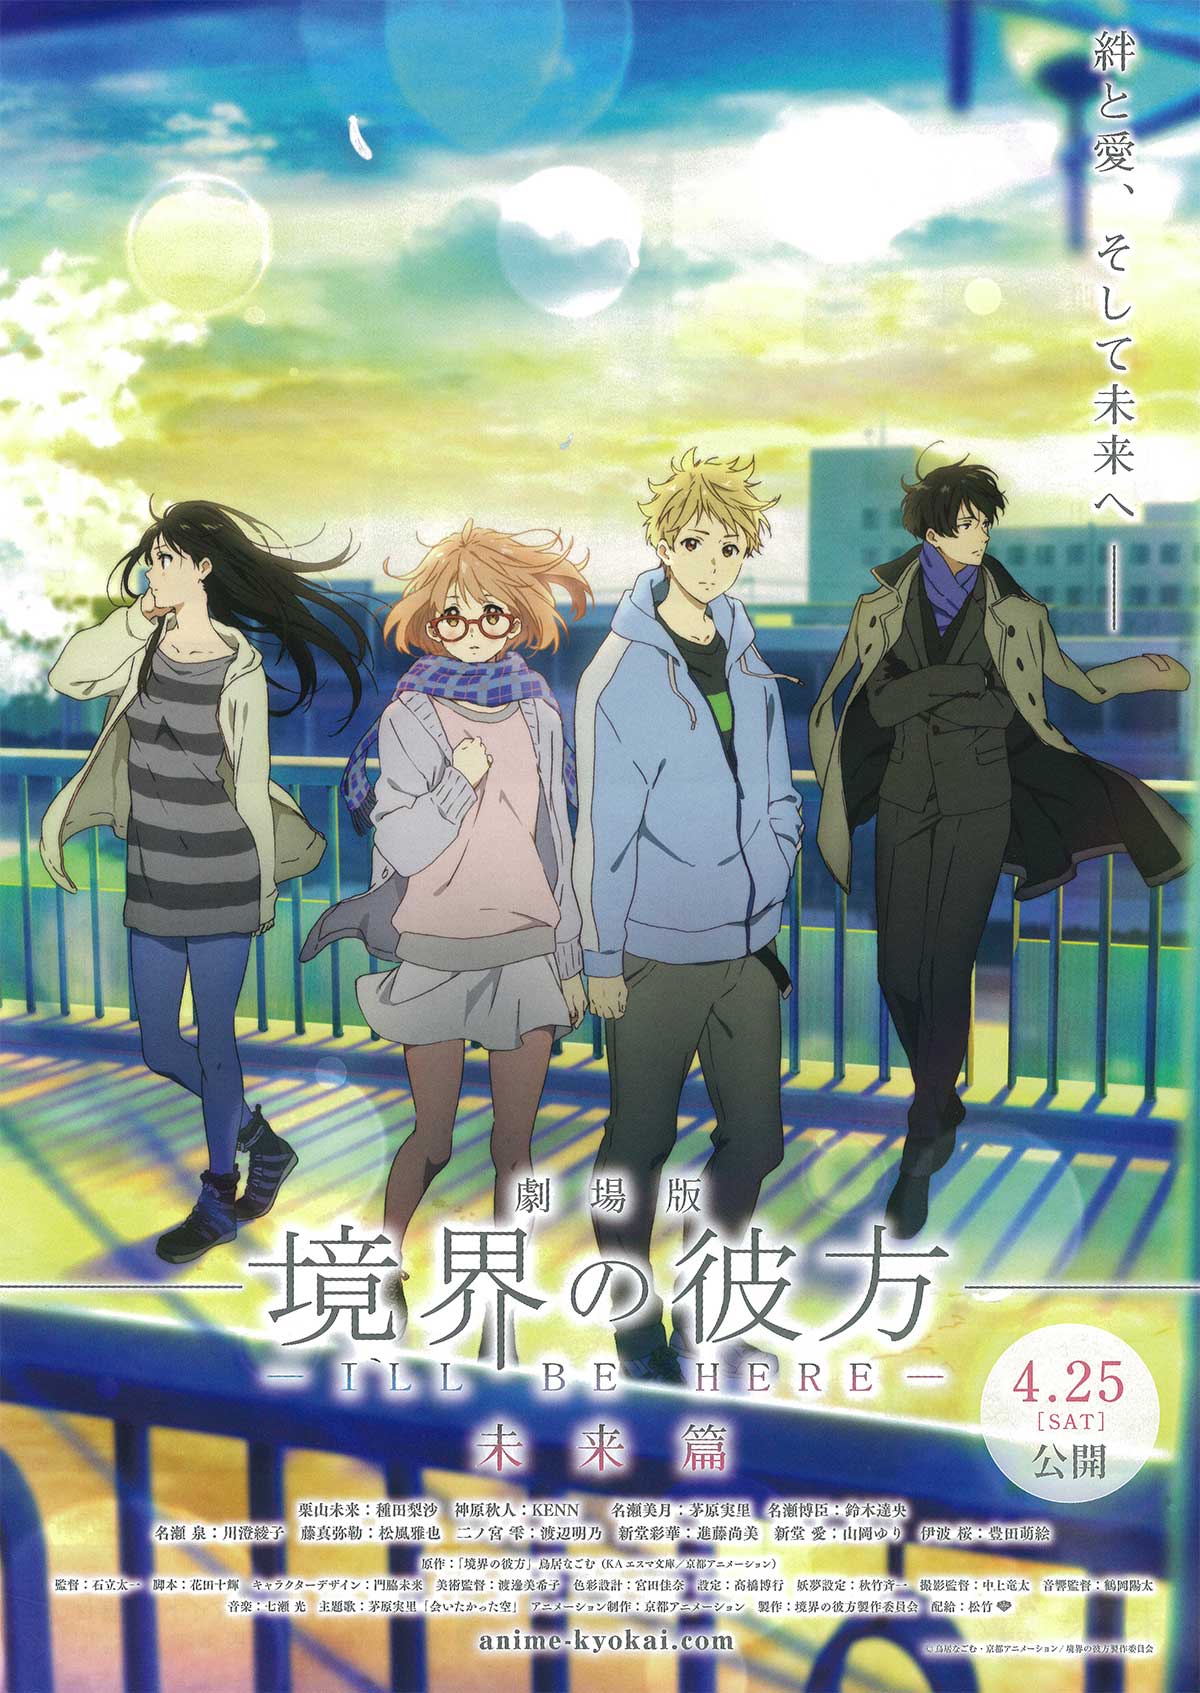 Beyond the Boundary: I'll Be Here - Future (Dub) poster